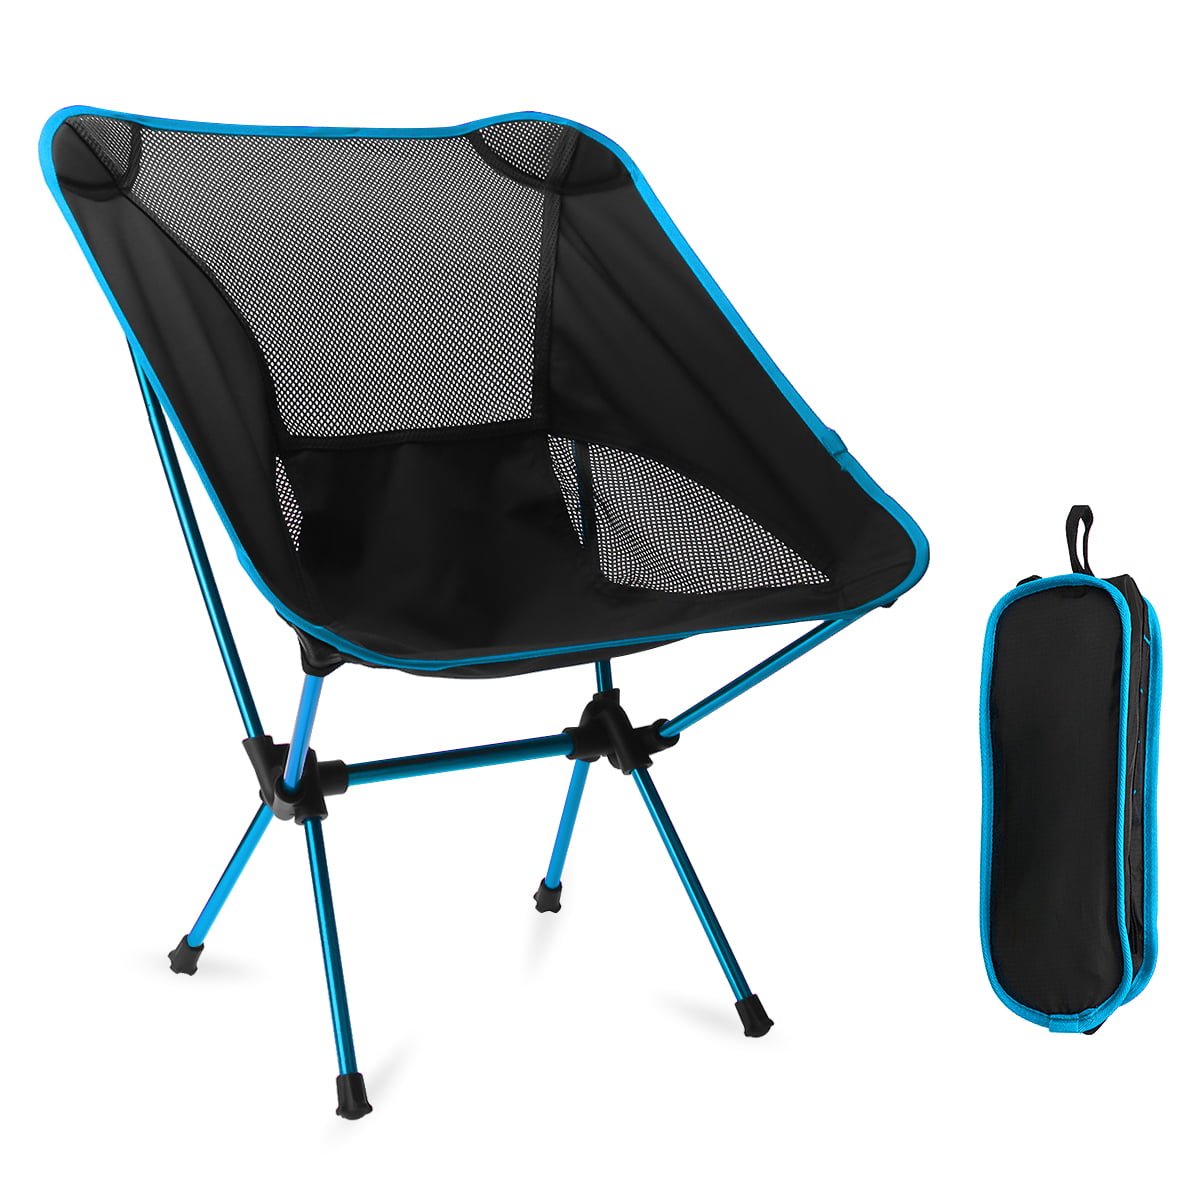 Hiking A Premium Folding Stool for Backpacking Concert & Spectator Adjustable Travel Seat with a 240 lbs Weight Limit Compact Sitpack Zen X-Series Lightweight & Portable Chair